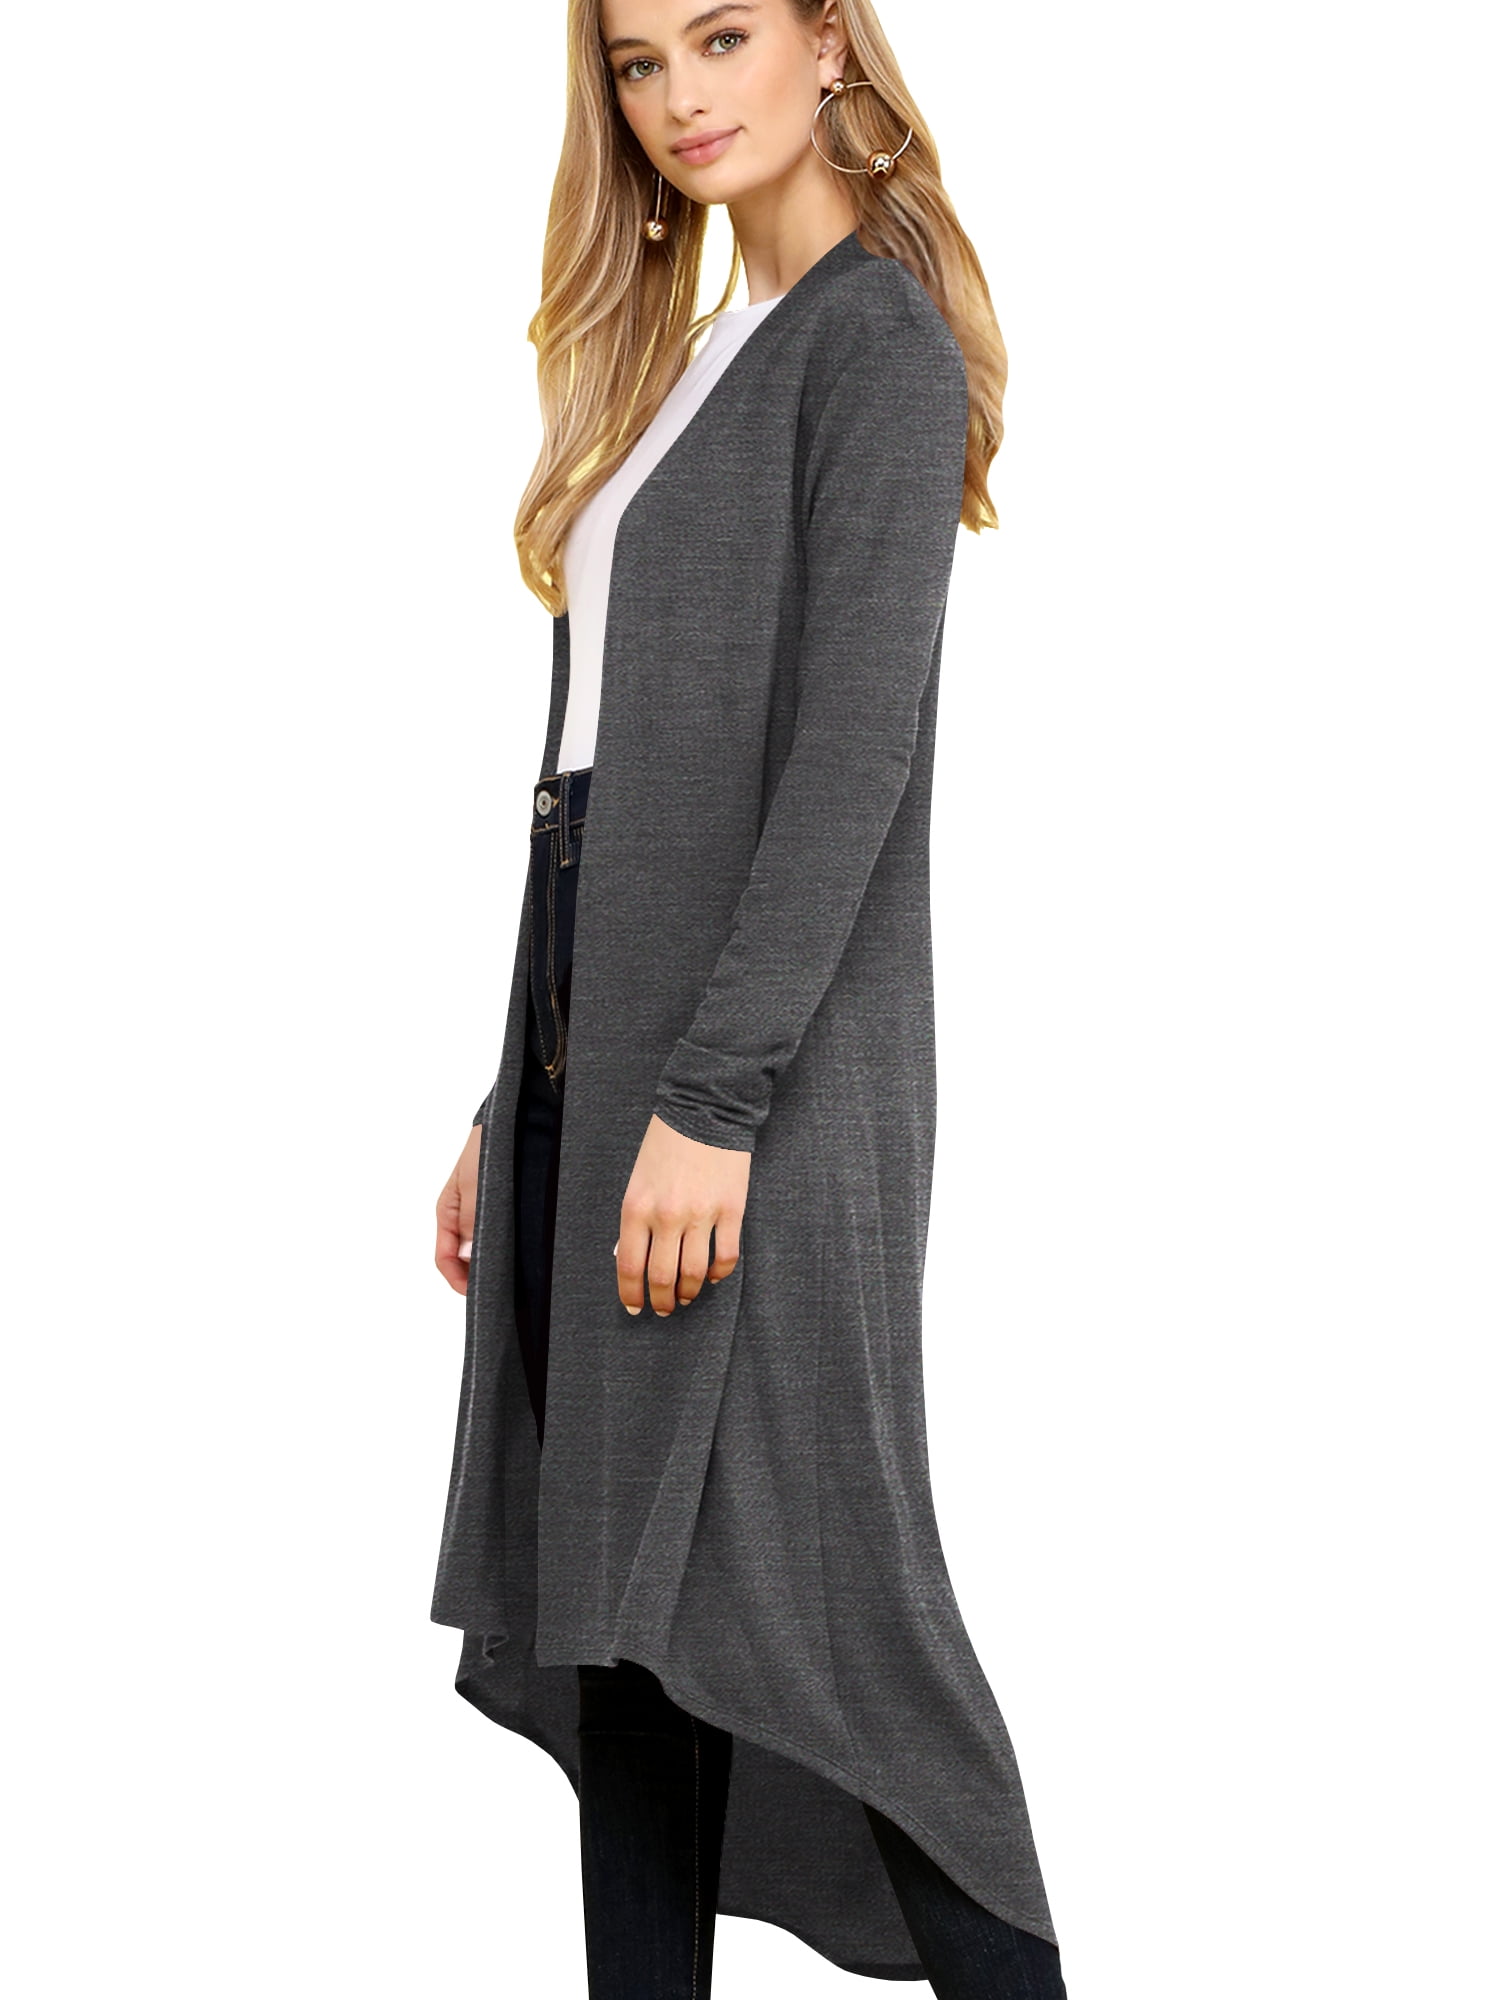 Made by Johnny Women's Casual Long Open Front Drape Lightweight Duster ...